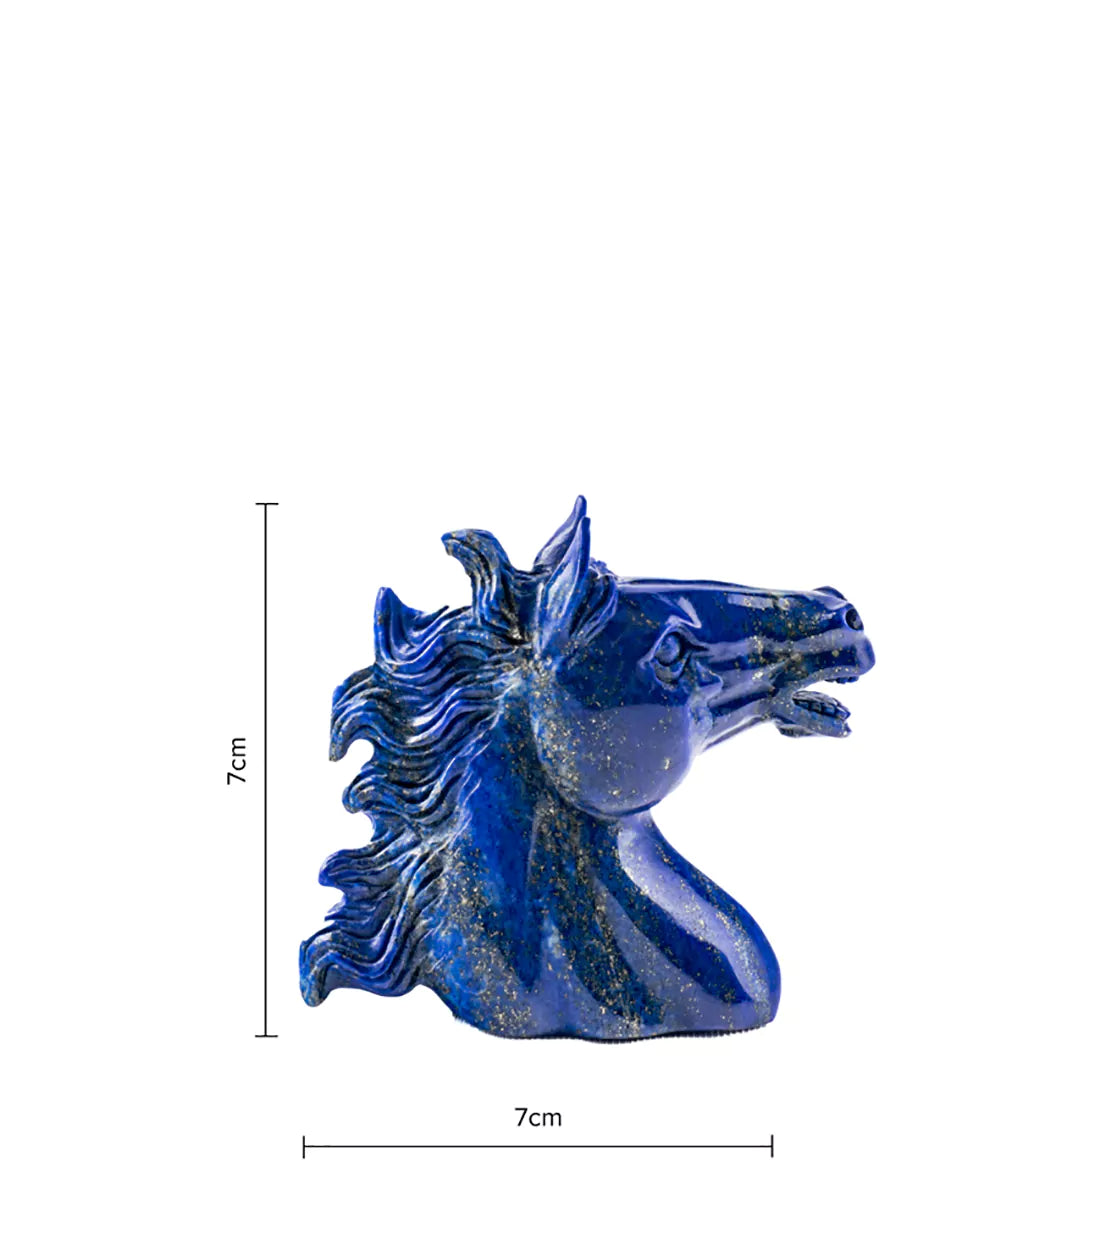 JIRI PACINEK - Blue Horse Showpiece - Add warmth and visual delight to your room with this unique decor